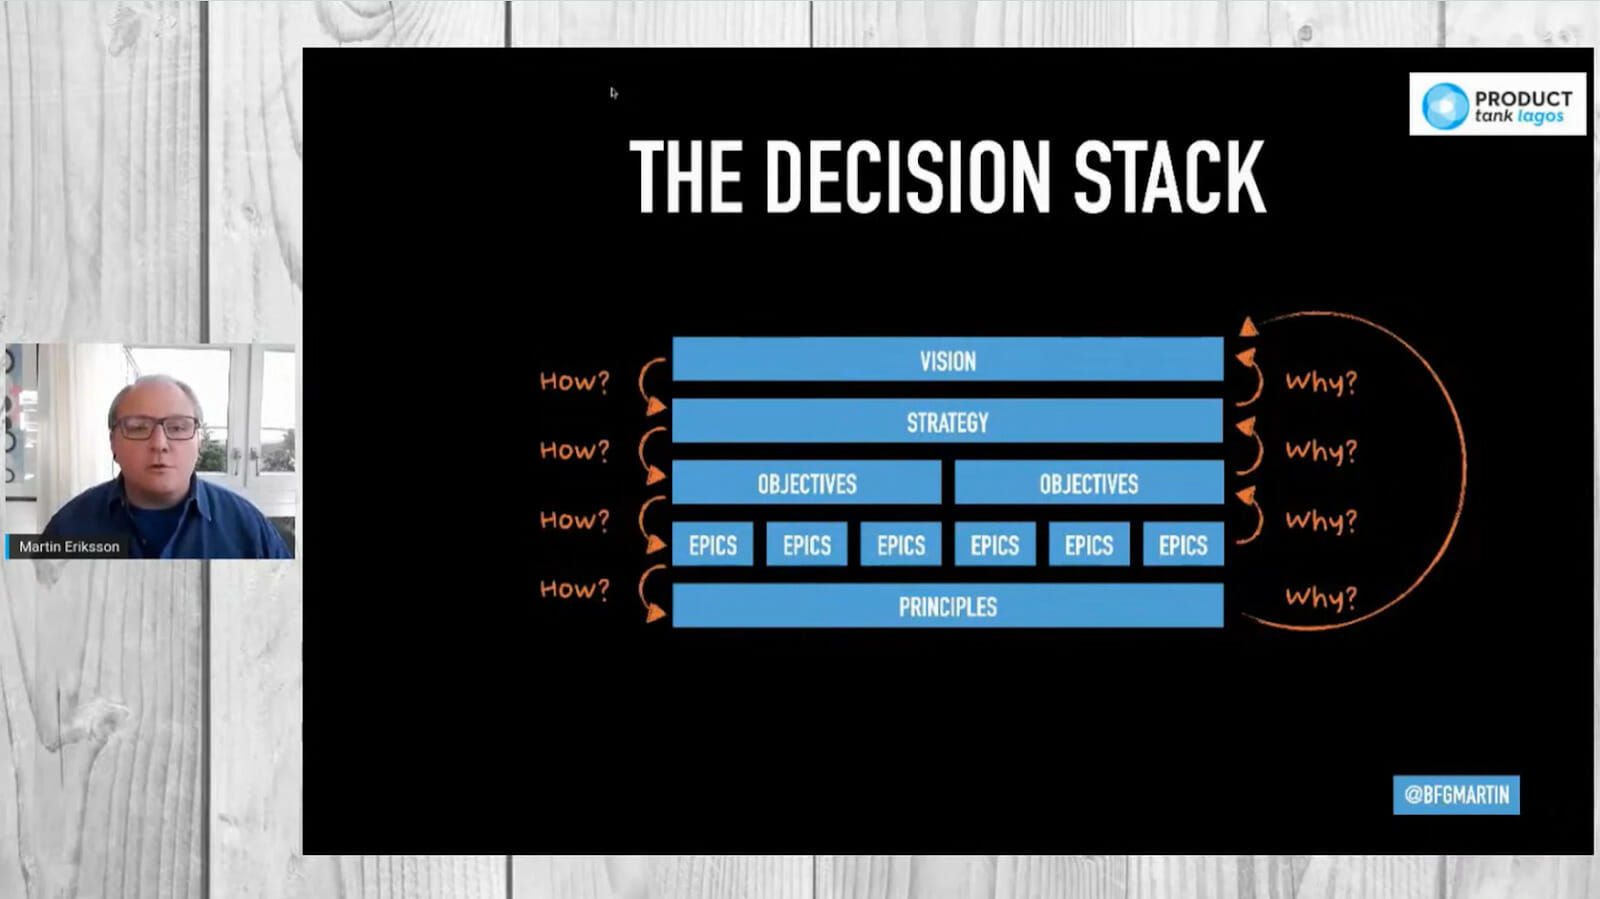 SUNDAY REWIND: The Product Decision Stack by Martin Eriksson